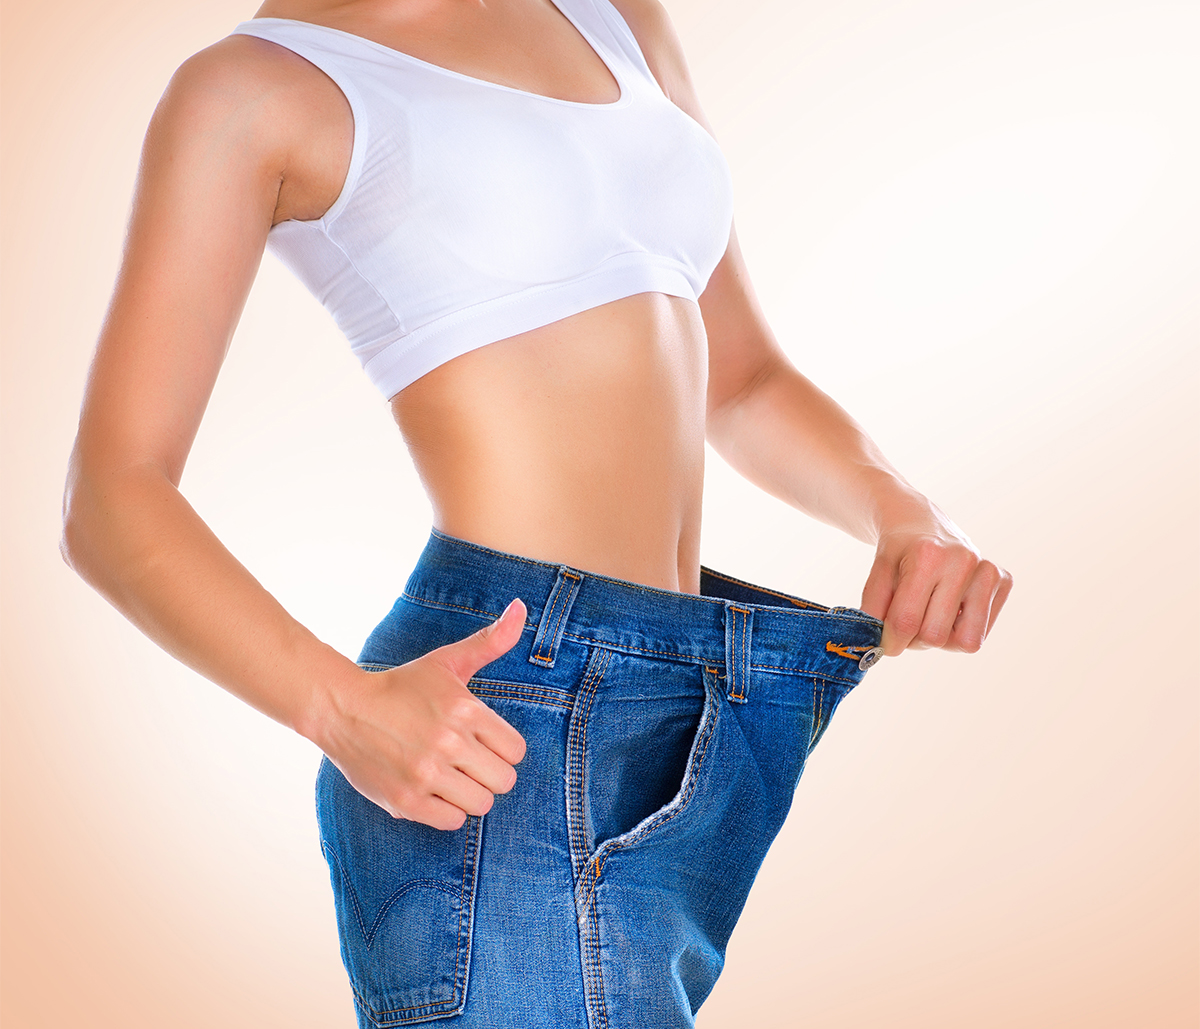 Use semaglutide injections to achieve boosted weight loss results